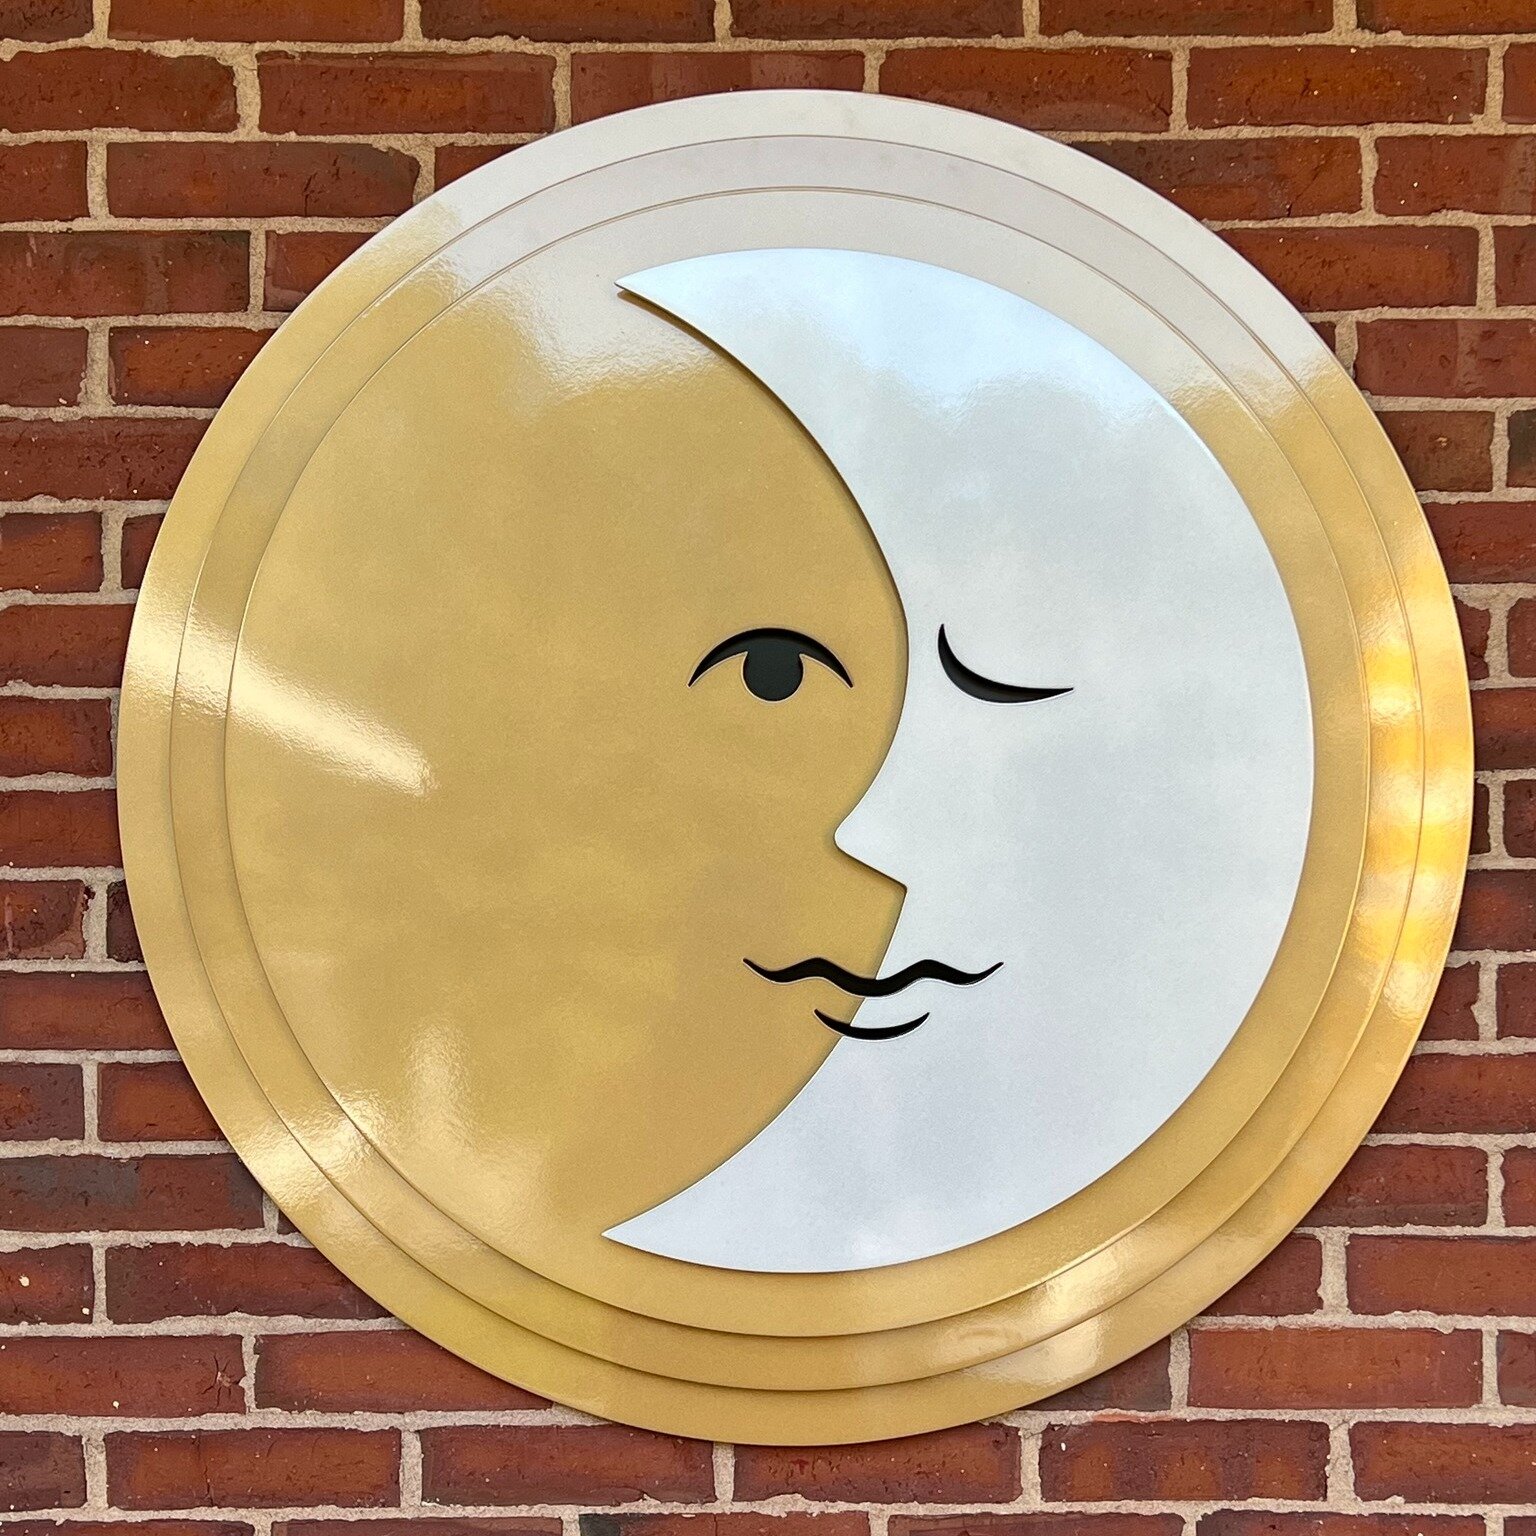 Bill Knight
𝘿𝙖𝙮 𝙞𝙣𝙩𝙤 𝙉𝙞𝙜𝙝𝙩
2023
36&quot; diameter
painted aluminum

Fabricated by VAF in 2023.